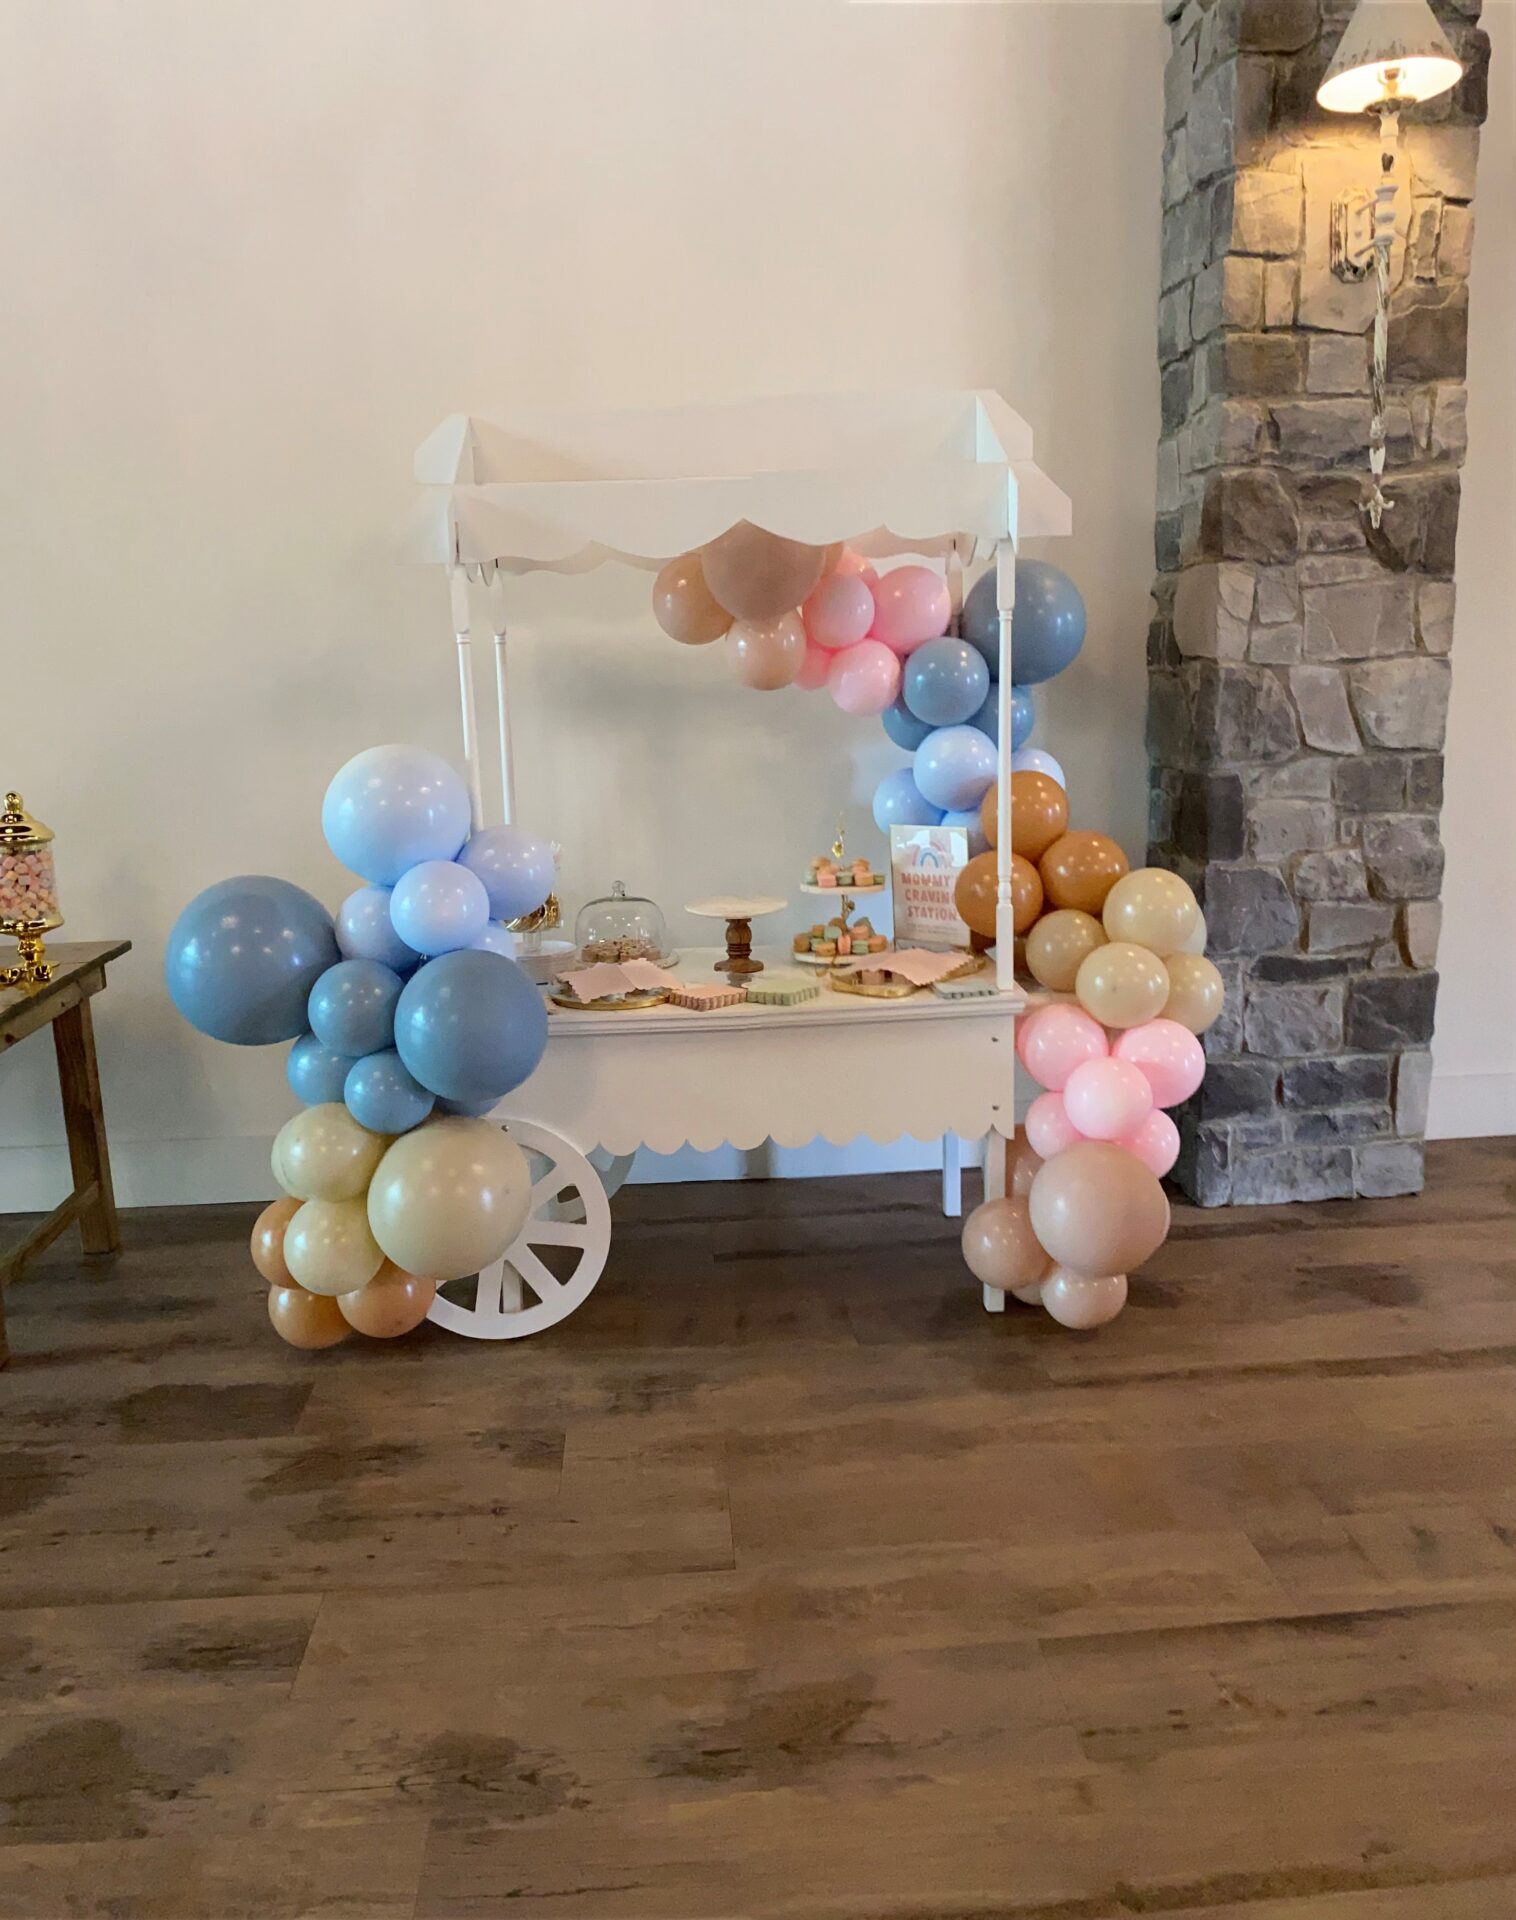 Daryl and Christine's Gender Reveal Event 4.9.2022